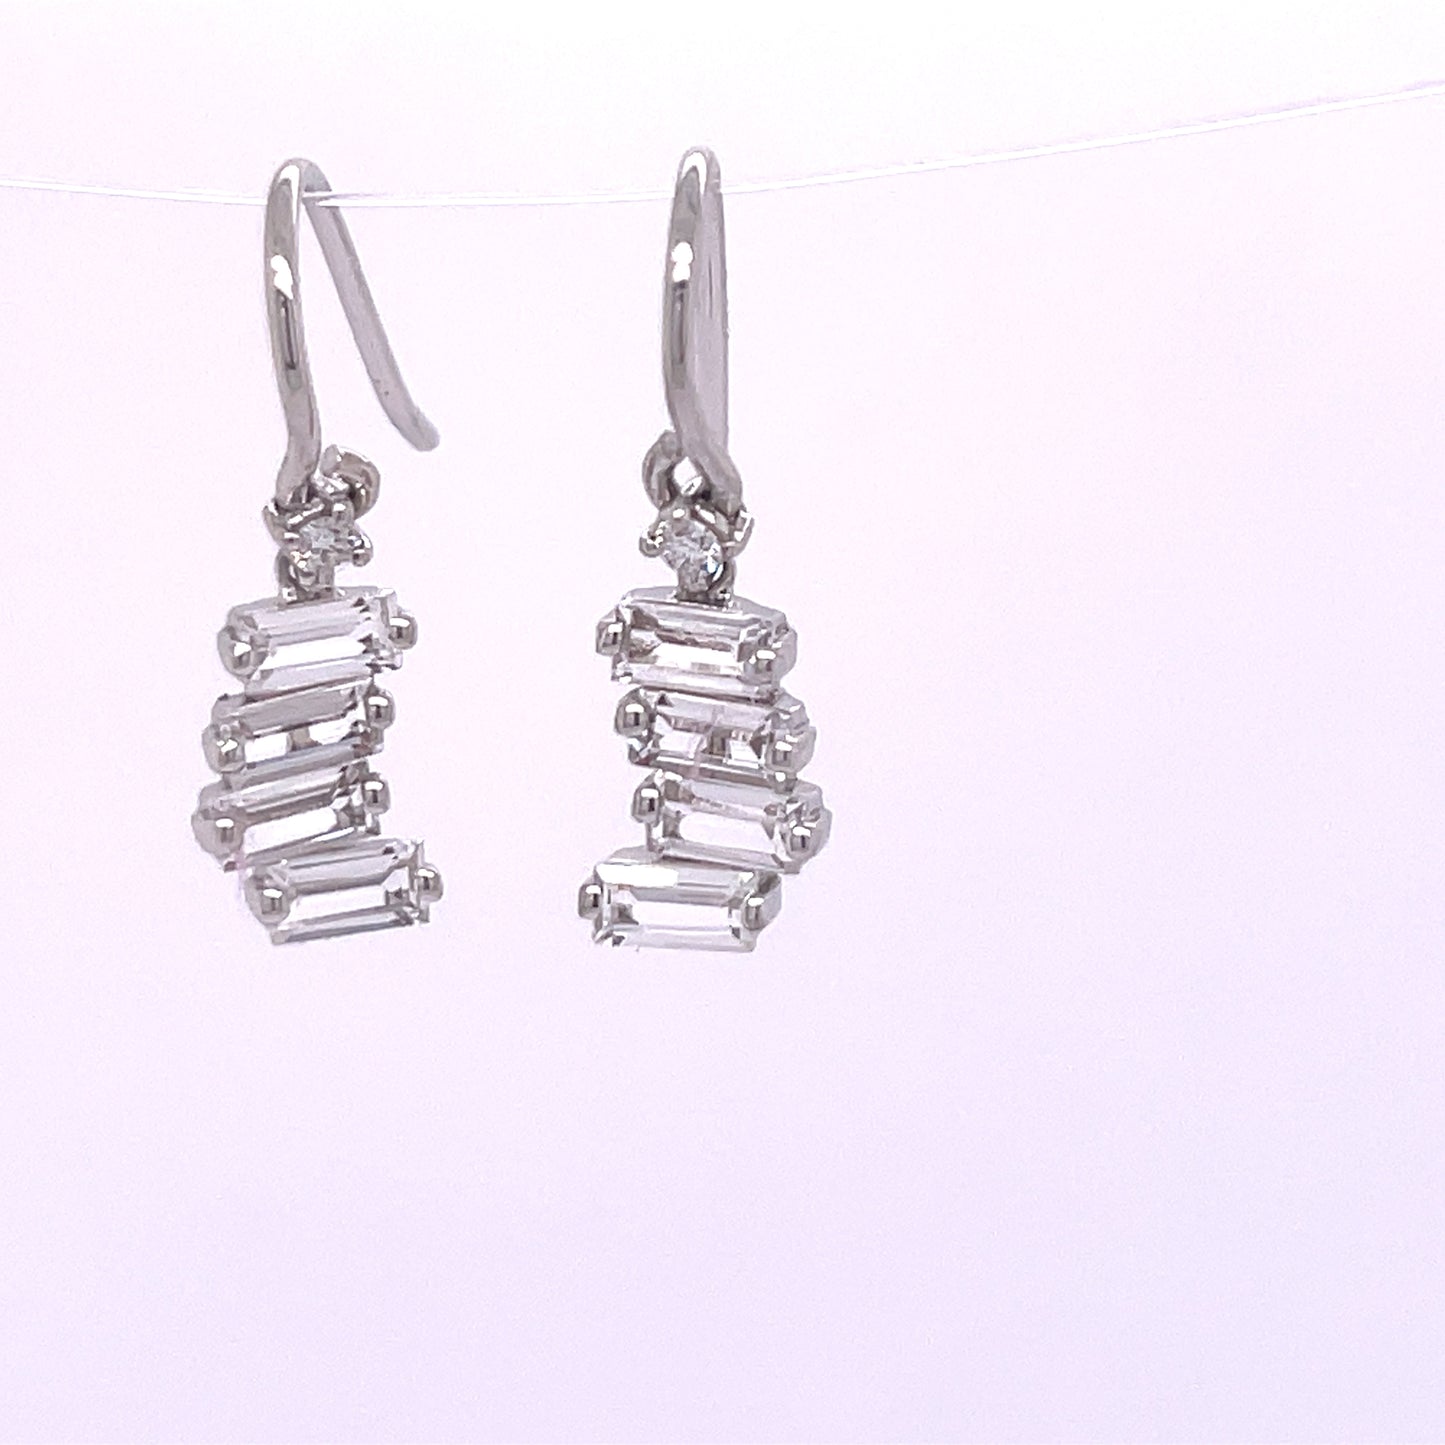 Fireworks White Topaz Baguette Earrings with Diamond Accents - Pair